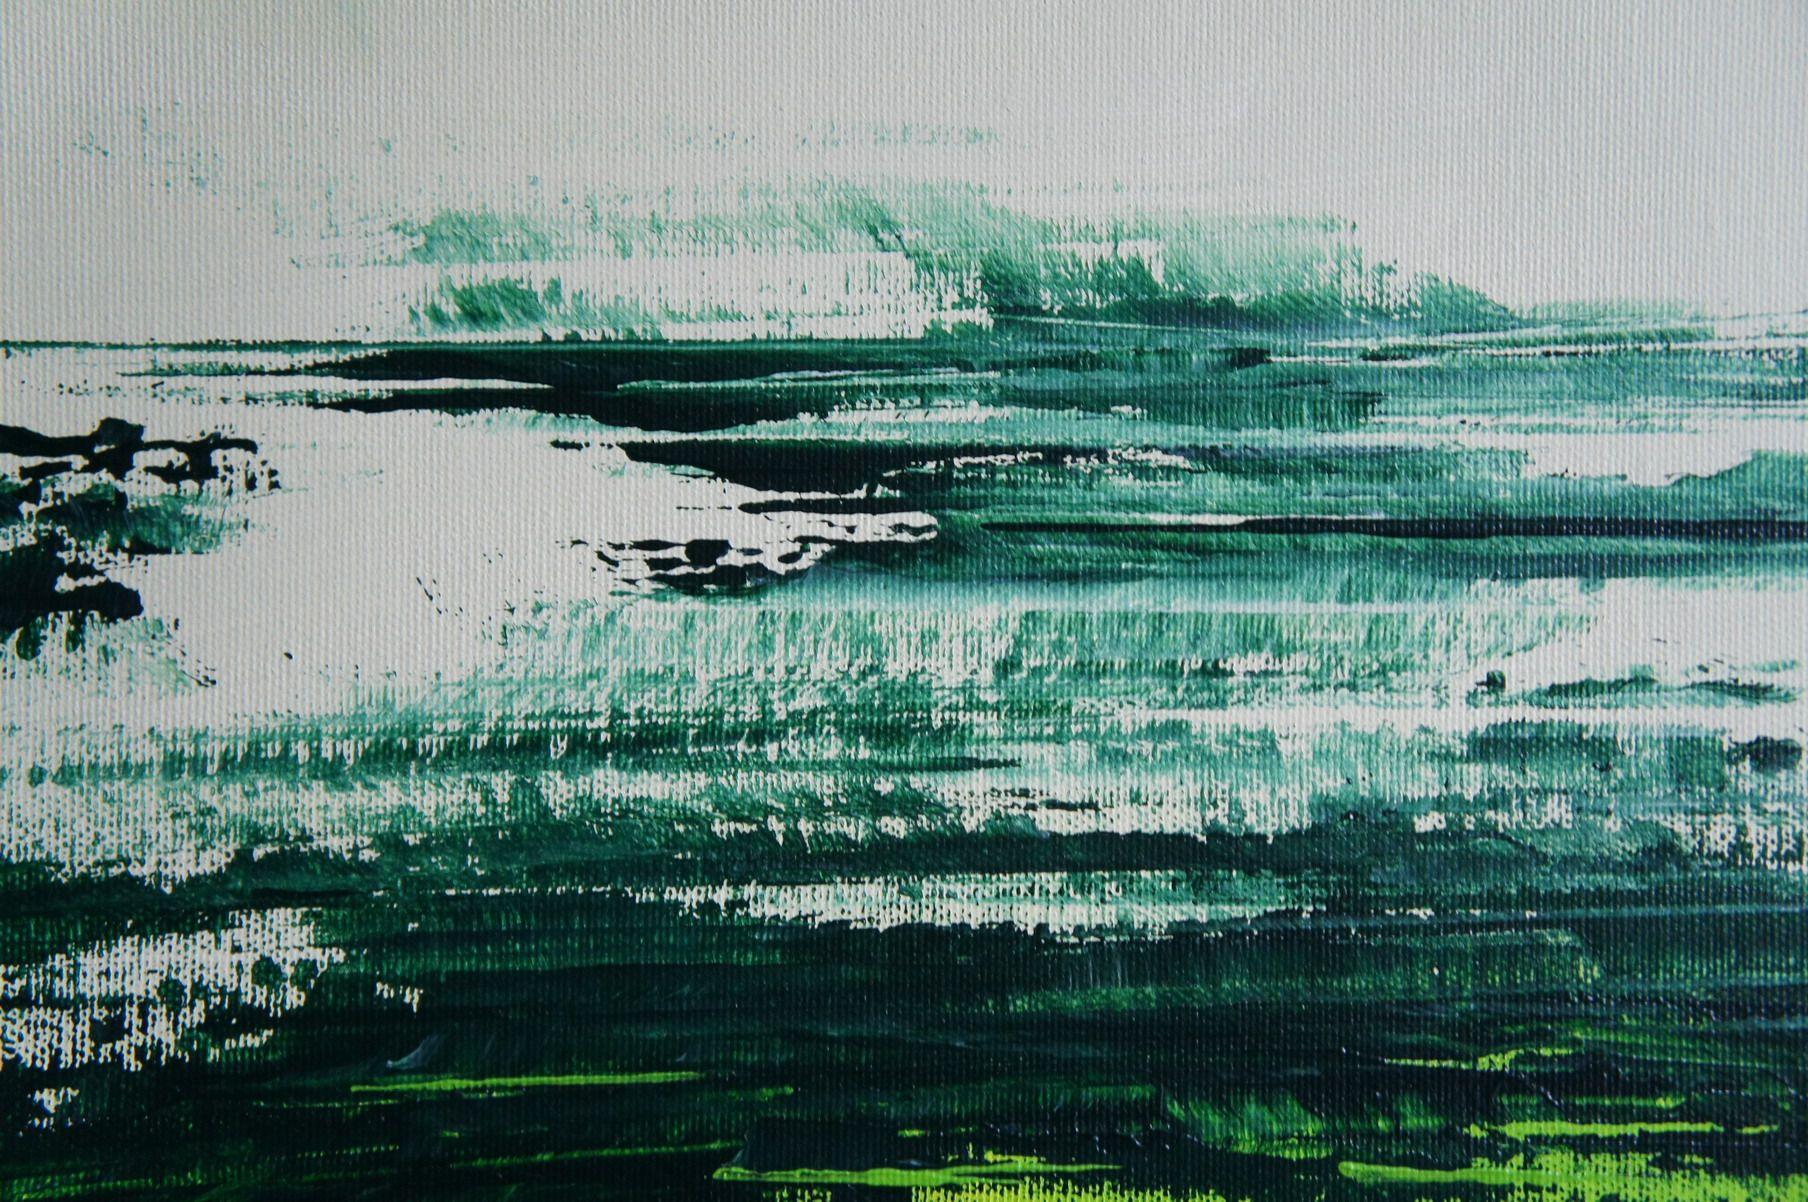 Hereâ€™s a very large calming piece with a band in green tones and otherwise even wide space of light green and white.    Unique painting using high-quality acrylic colors on professional gallery canvas stretched over solid wooden 4.5 x 3.0 cm